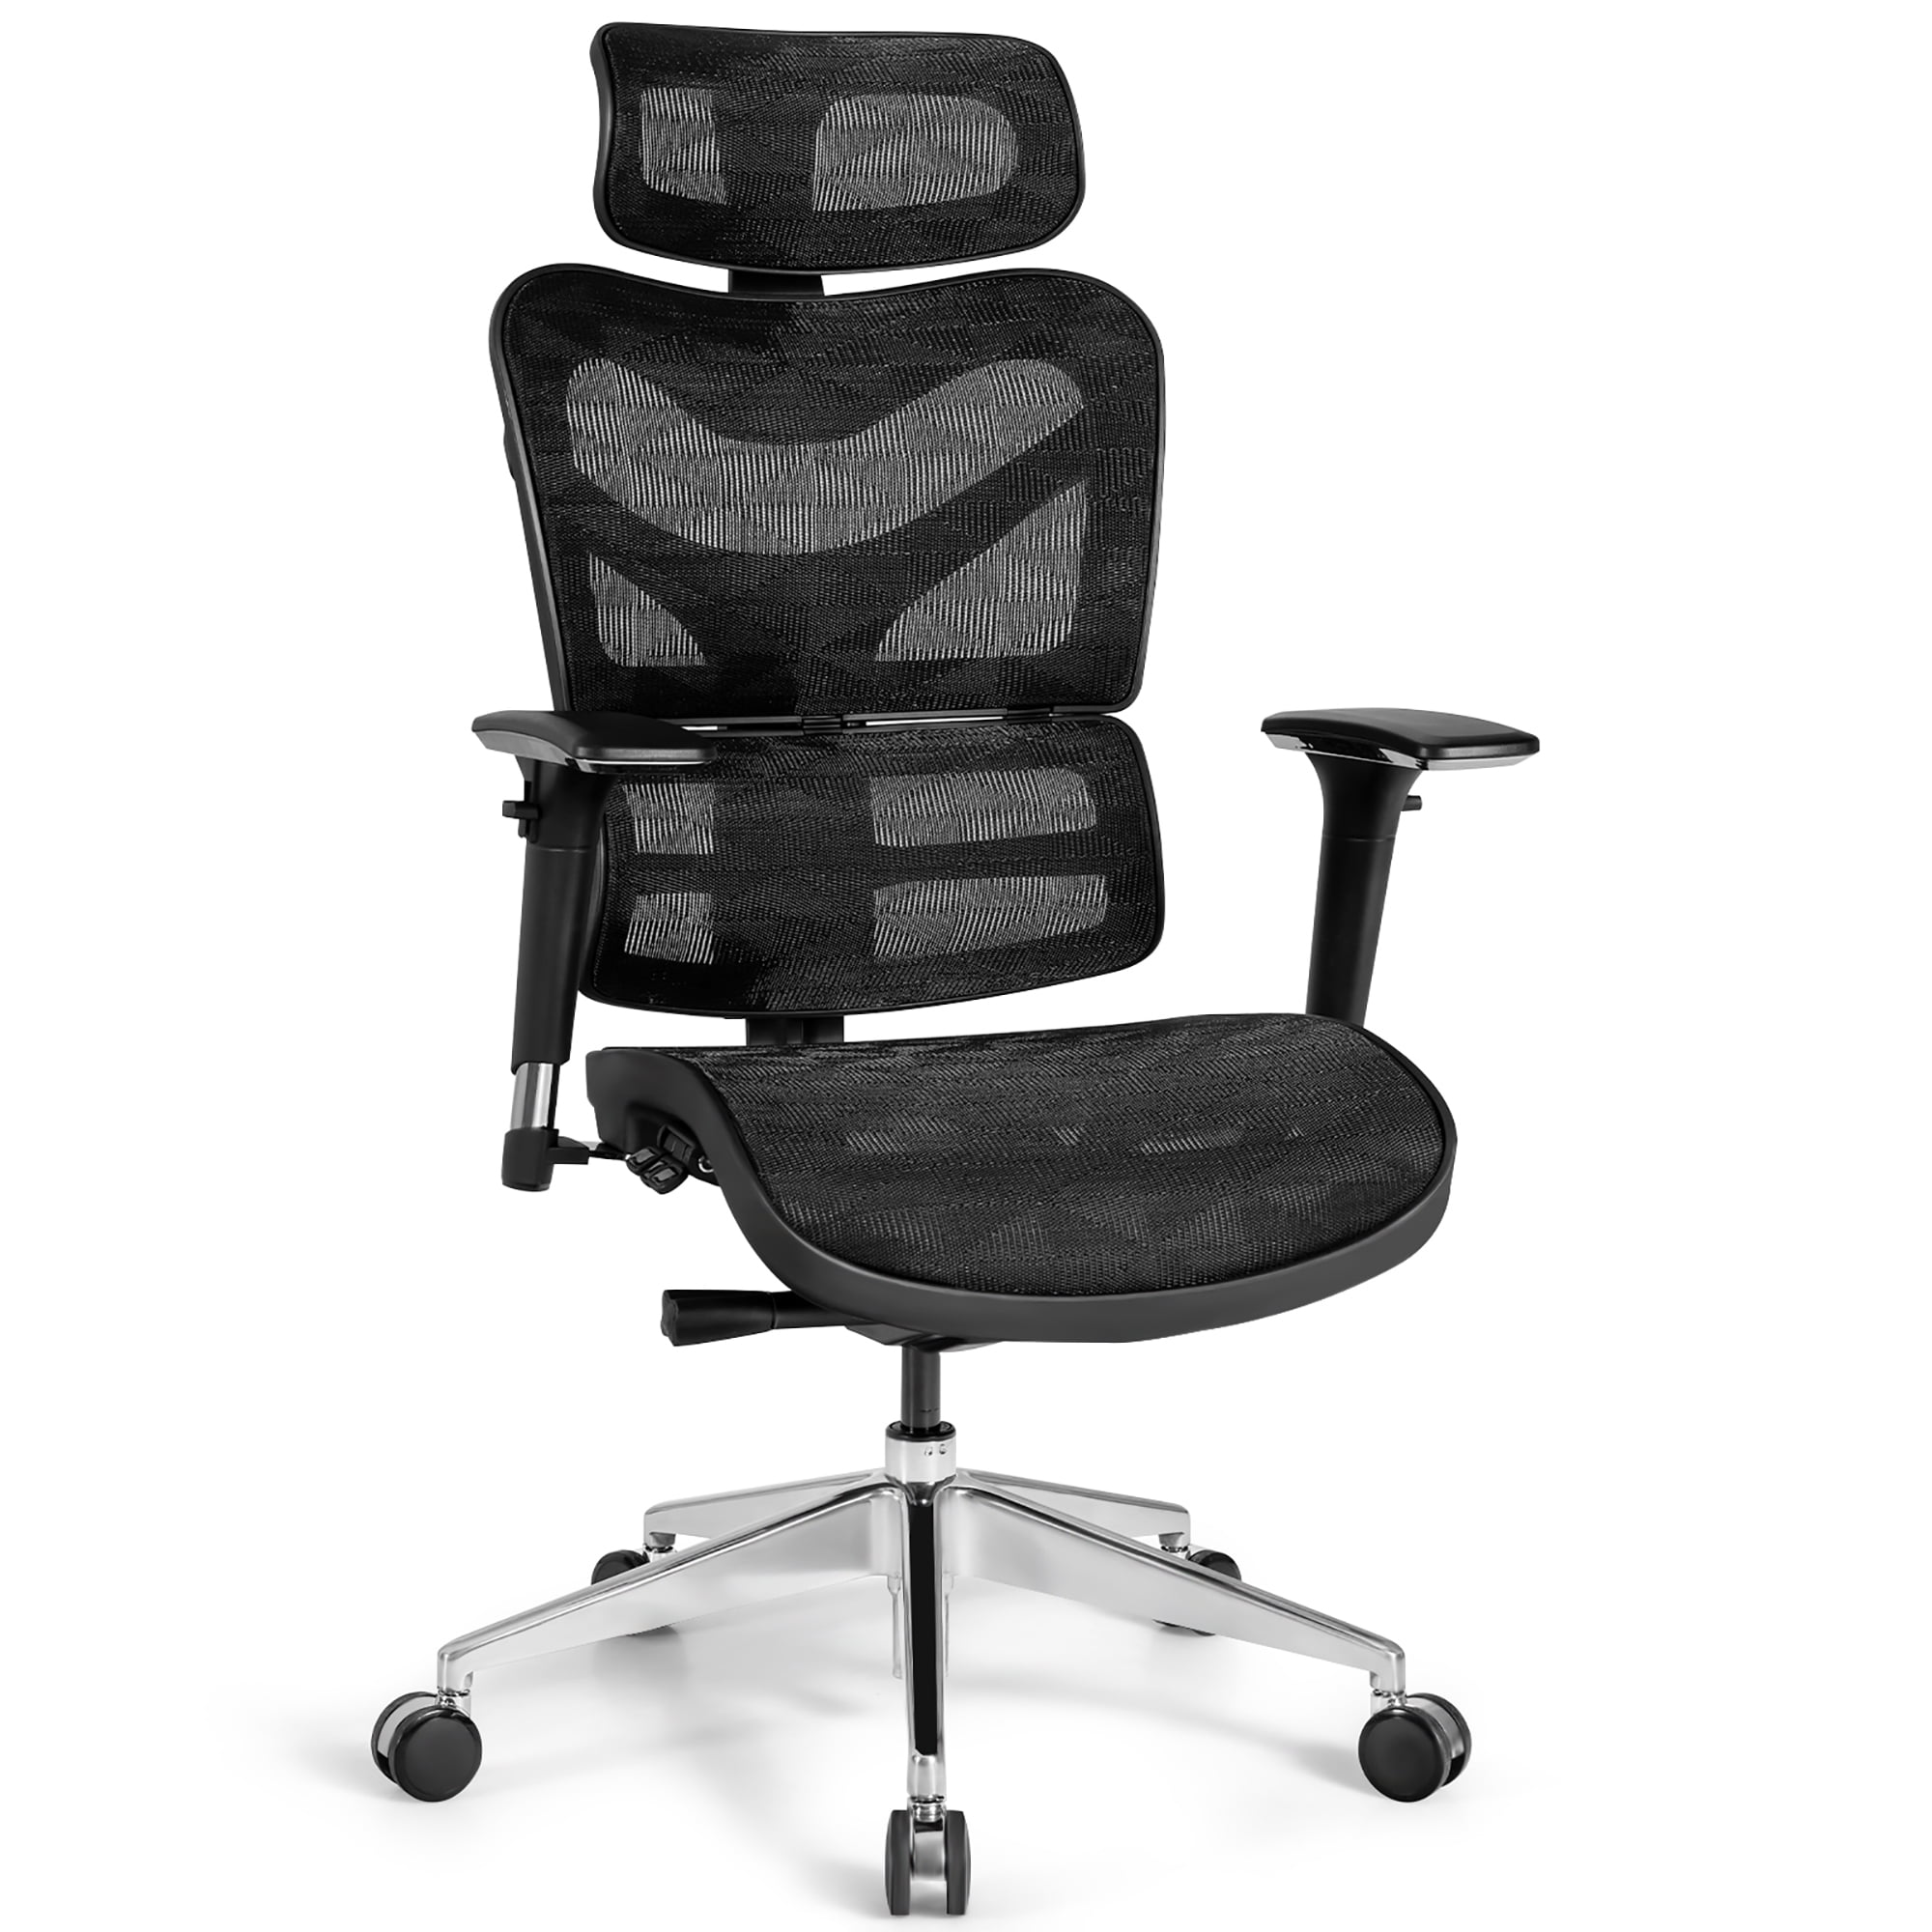 Ergonomic Mesh Office Chair with Adjustable Lumbar Support High Back Reclinable 